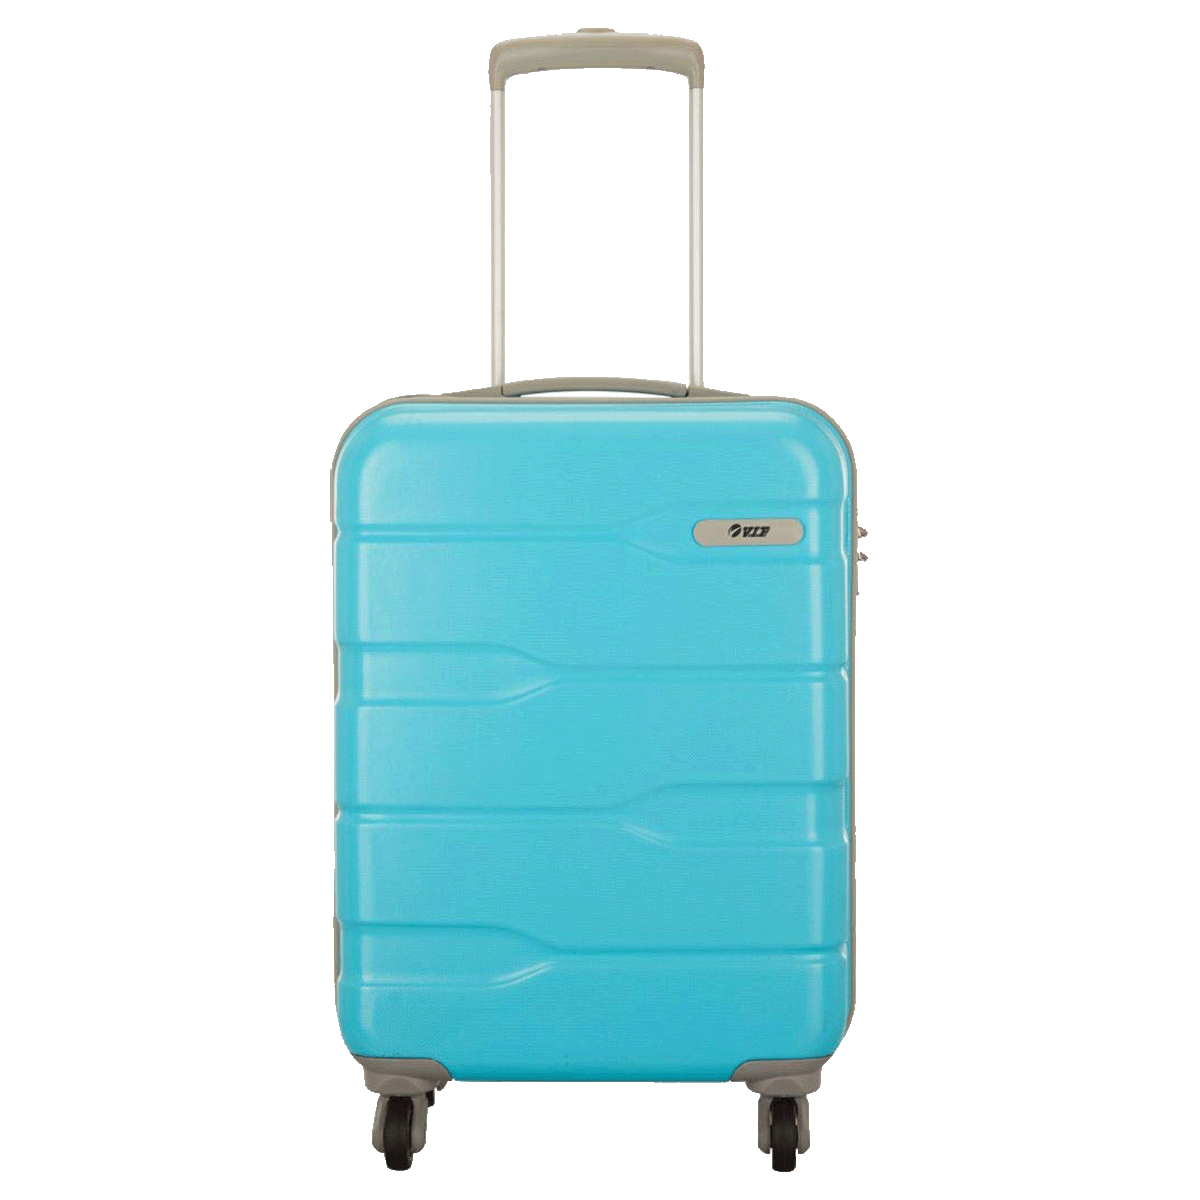 VIP - VIP Trolley Bag for Luggage (ARGO55OBL, As Per Stock Availability)